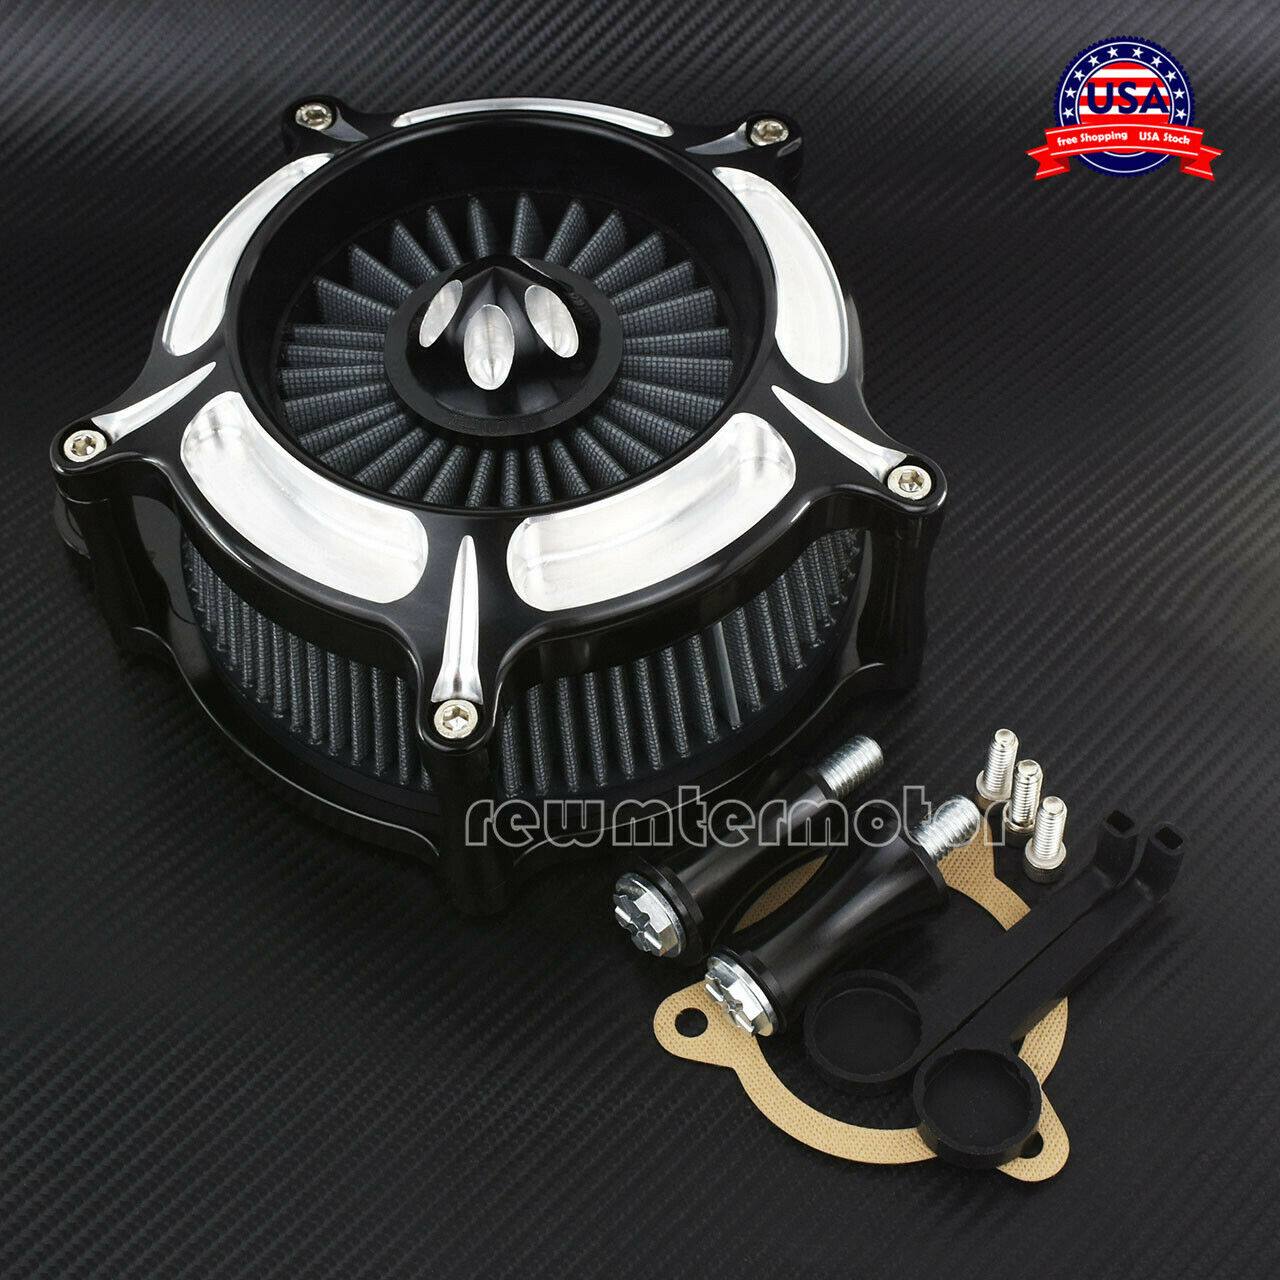 Turbine Spike Air Cleaner Intake Filter Fit For Harley Touring 17-19 Softail 18 - Moto Life Products